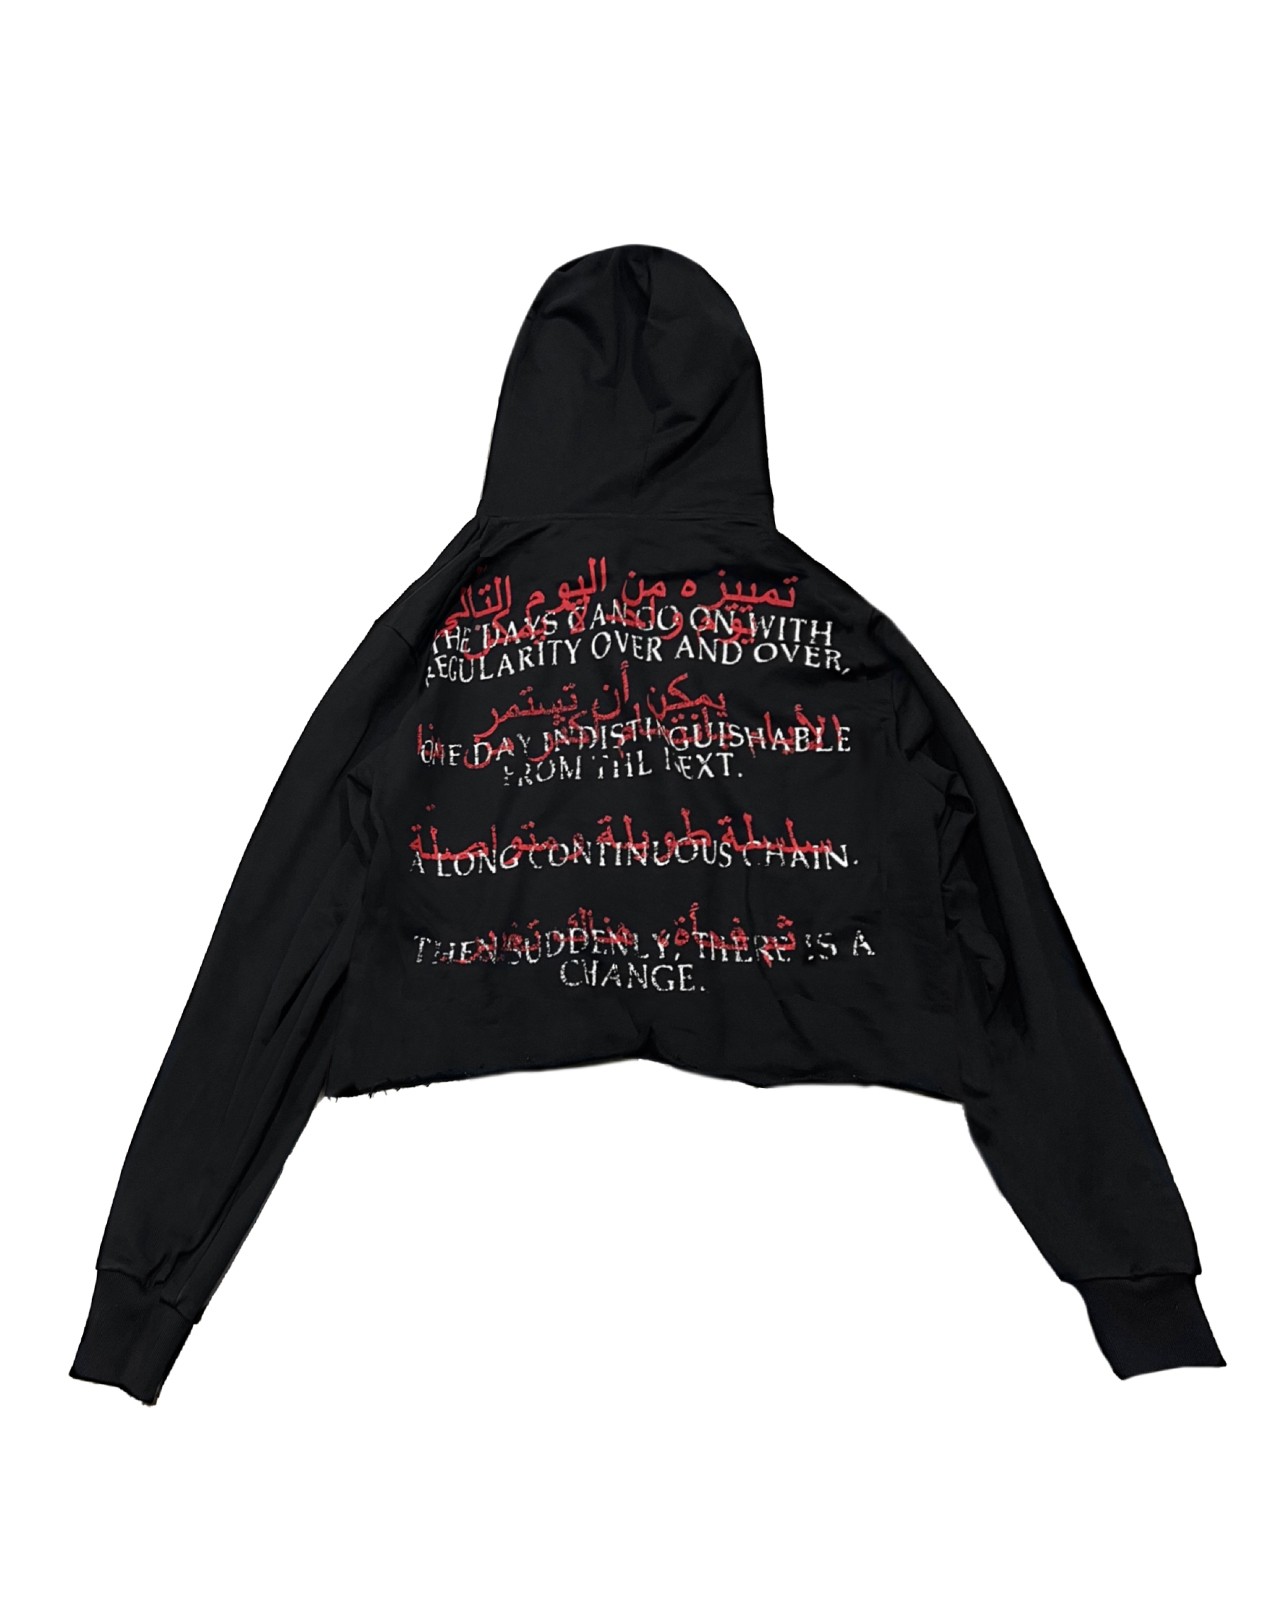 Wounded '' Change '' Hoodie